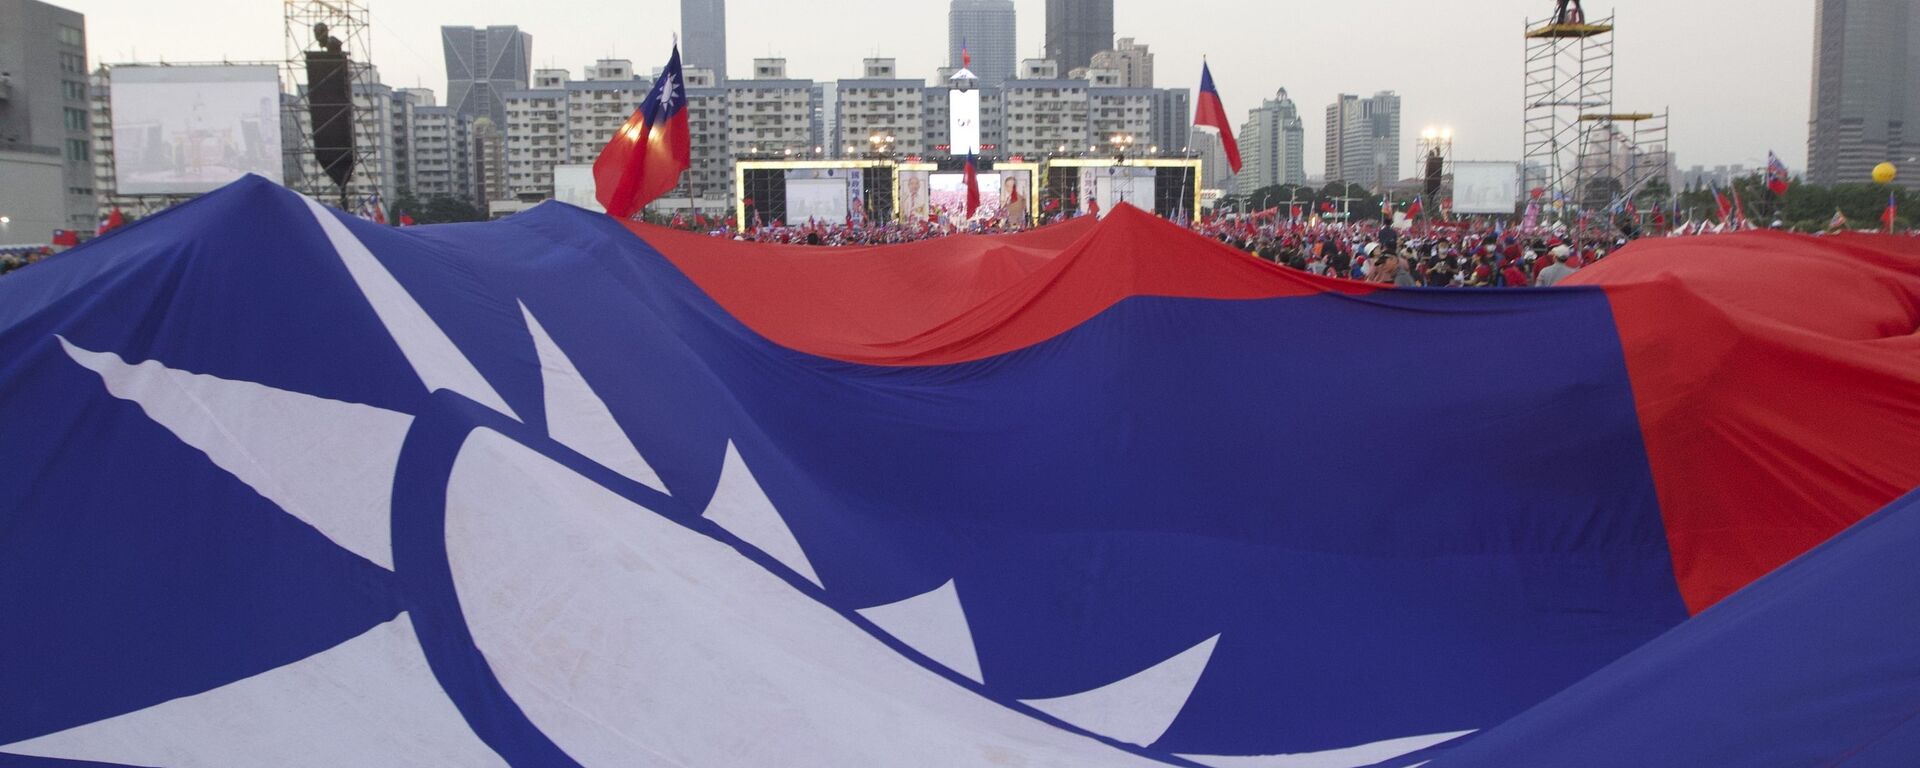 Supporters of Taiwan's 2020 presidential election candidate for the KMT, or Nationalist Party, Han Kuo-yu pass along a giant Taiwanese flag for the start of a campaign rally in southern Taiwan's Kaohsiung city on Friday, Jan 10, 2020 - Sputnik International, 1920, 22.09.2022